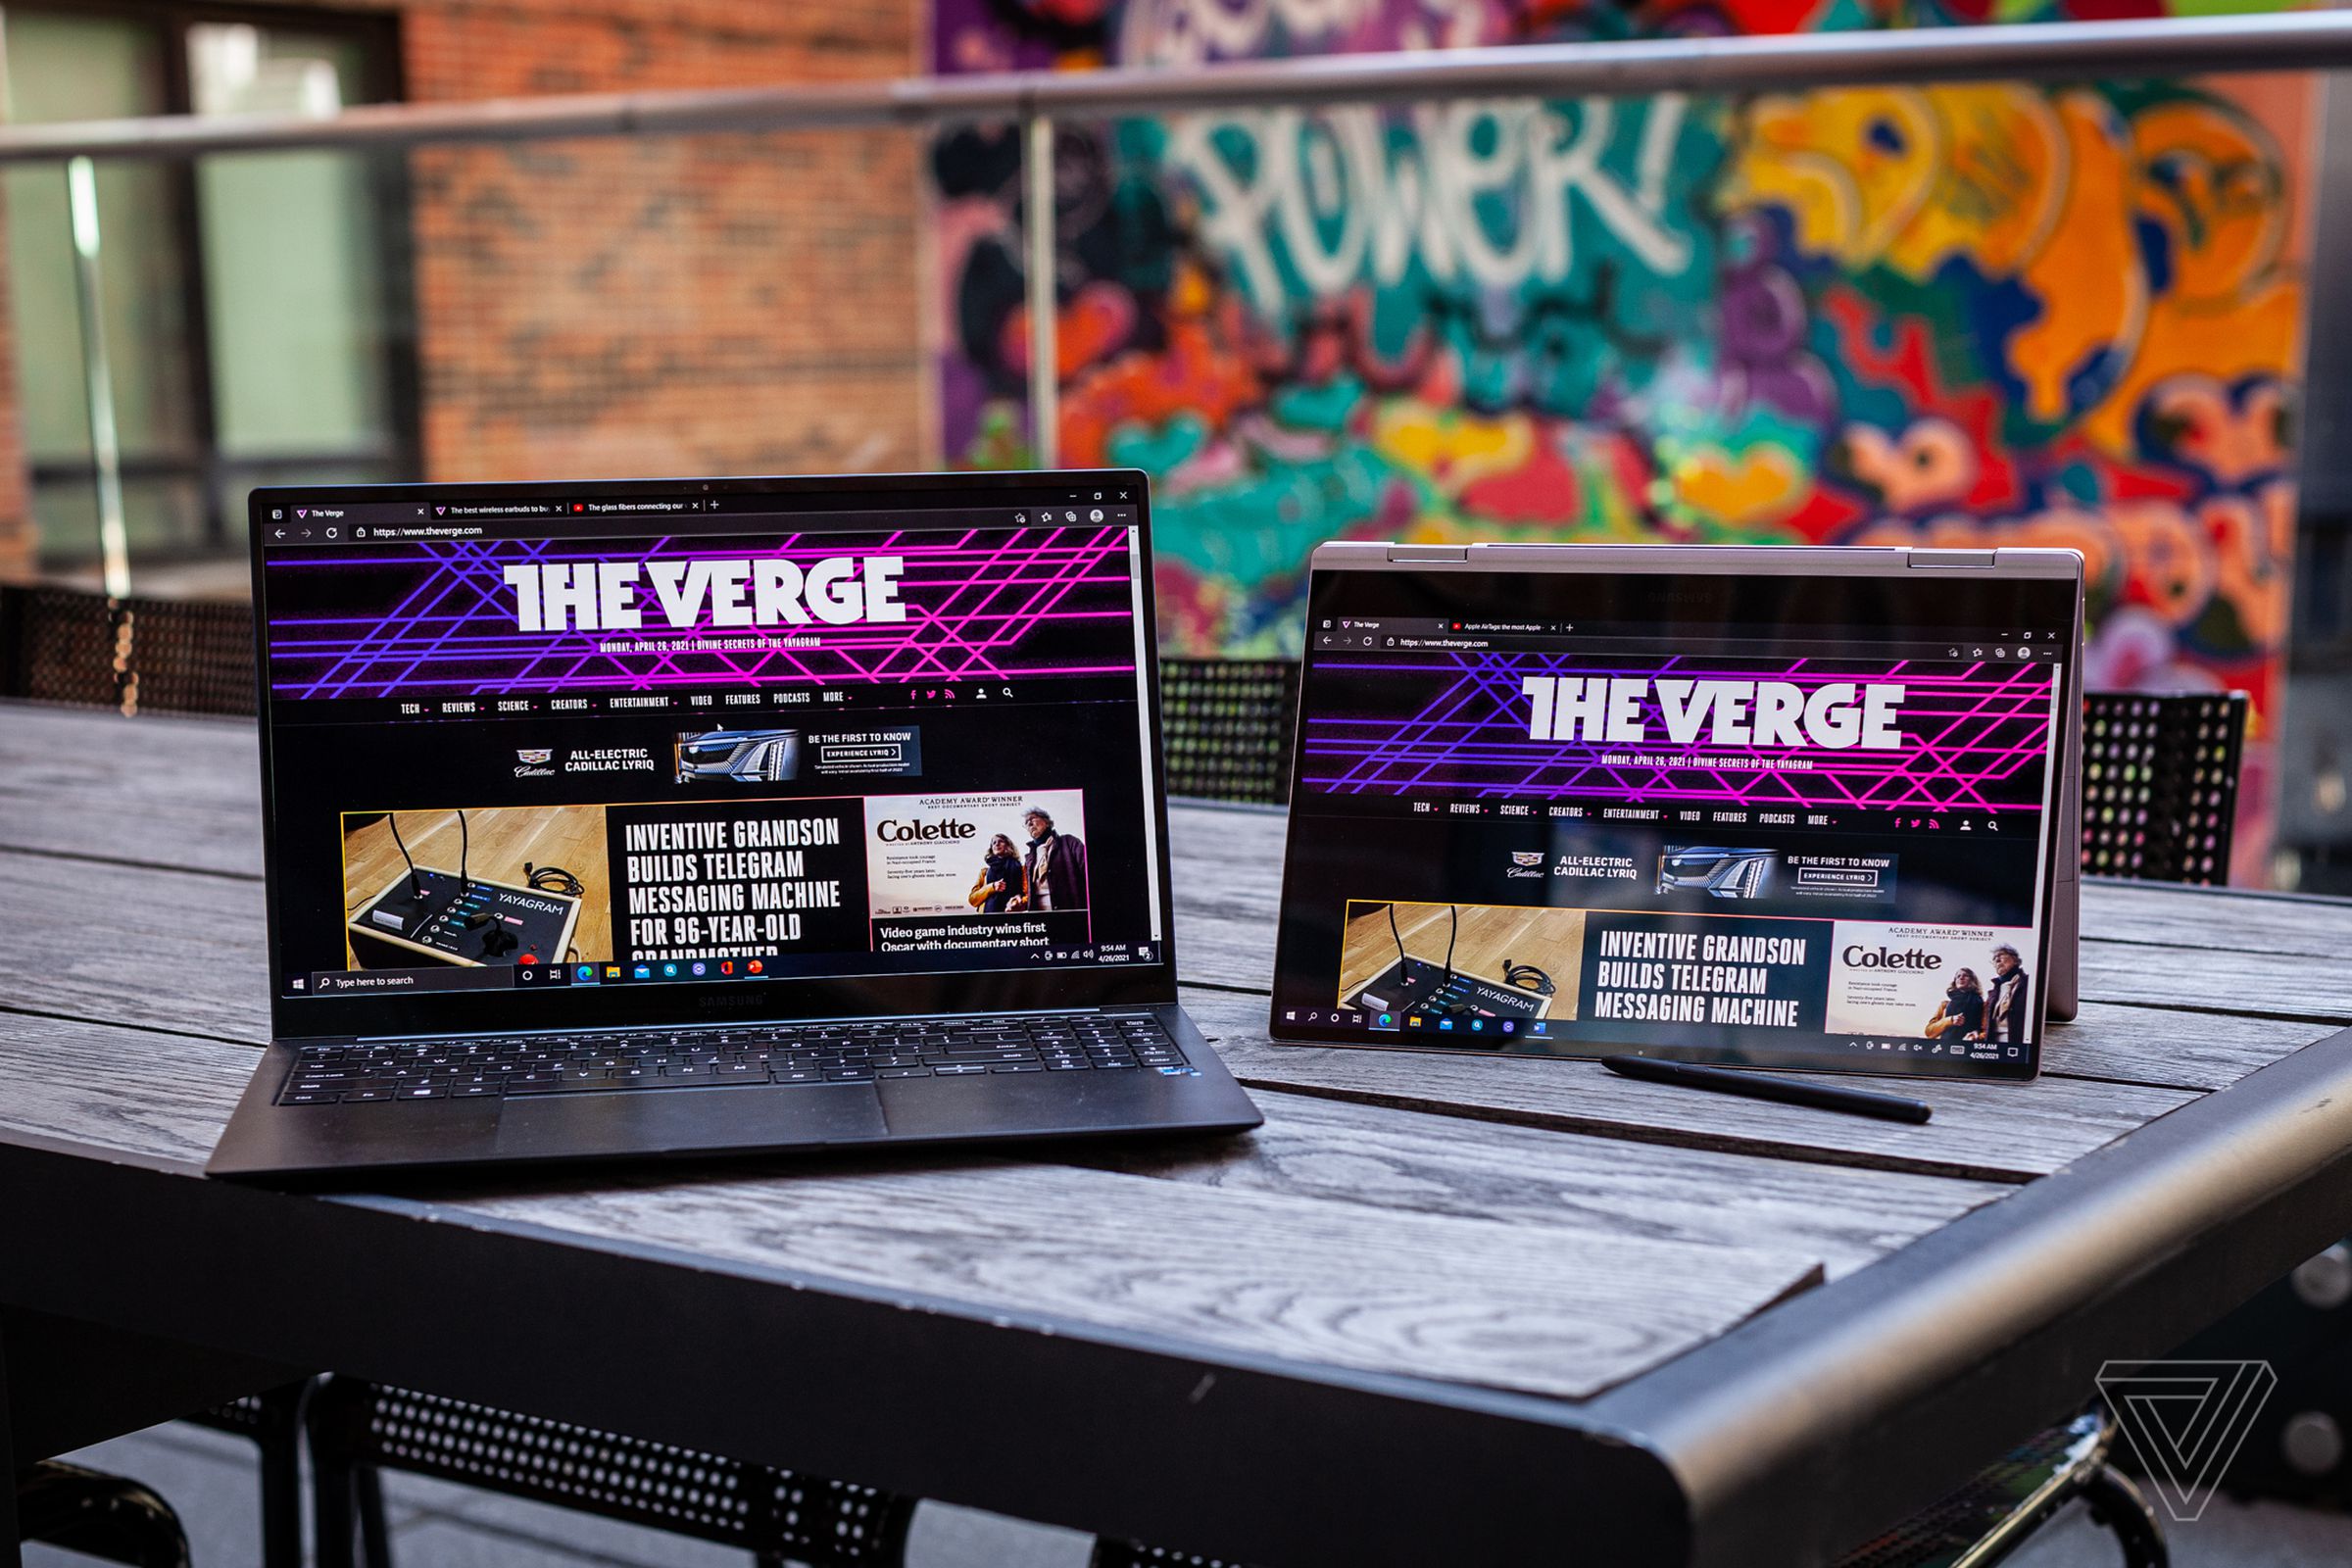 The Samsung Galaxy Book Pro open, and the Samsung Galaxy Book Pro 360 in tent mode, side by side on a picnic table. Both screens display The Verge homepage. The S-Pen lies in front of the Galaxy Book pro 360.